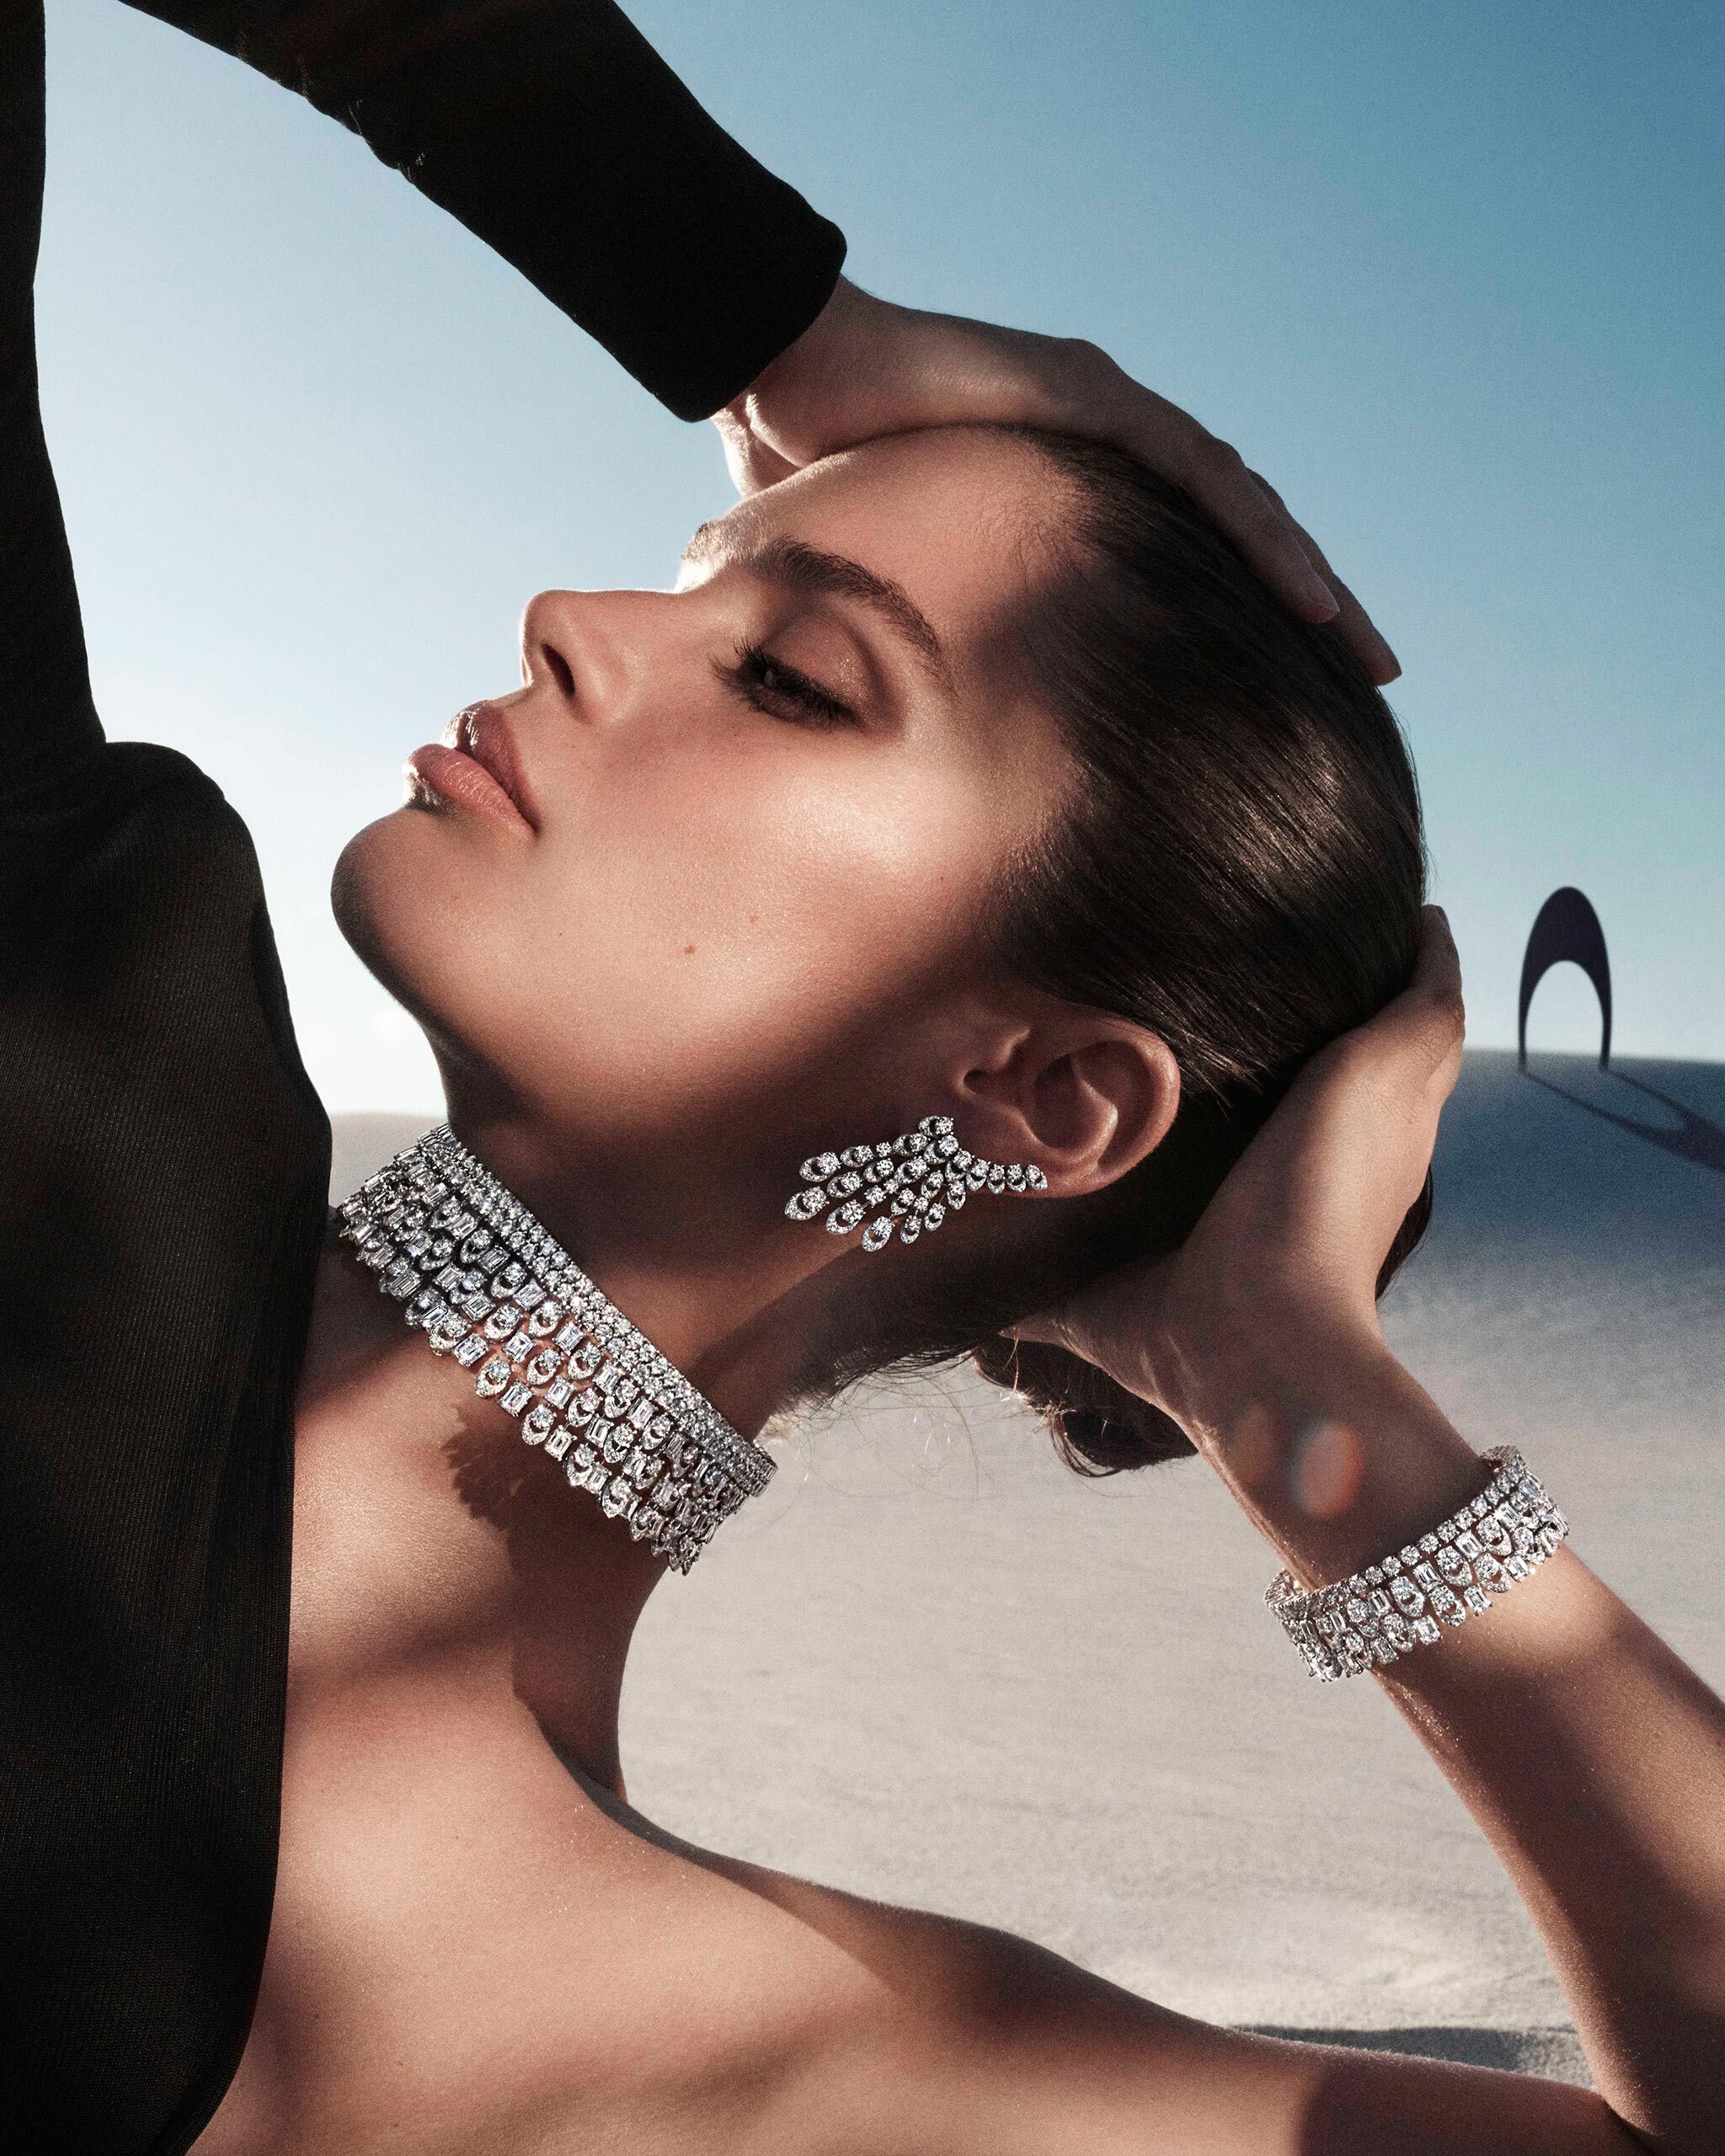 Model wears Graff Gateway diamond jewels from the Tribal collection, in a desert